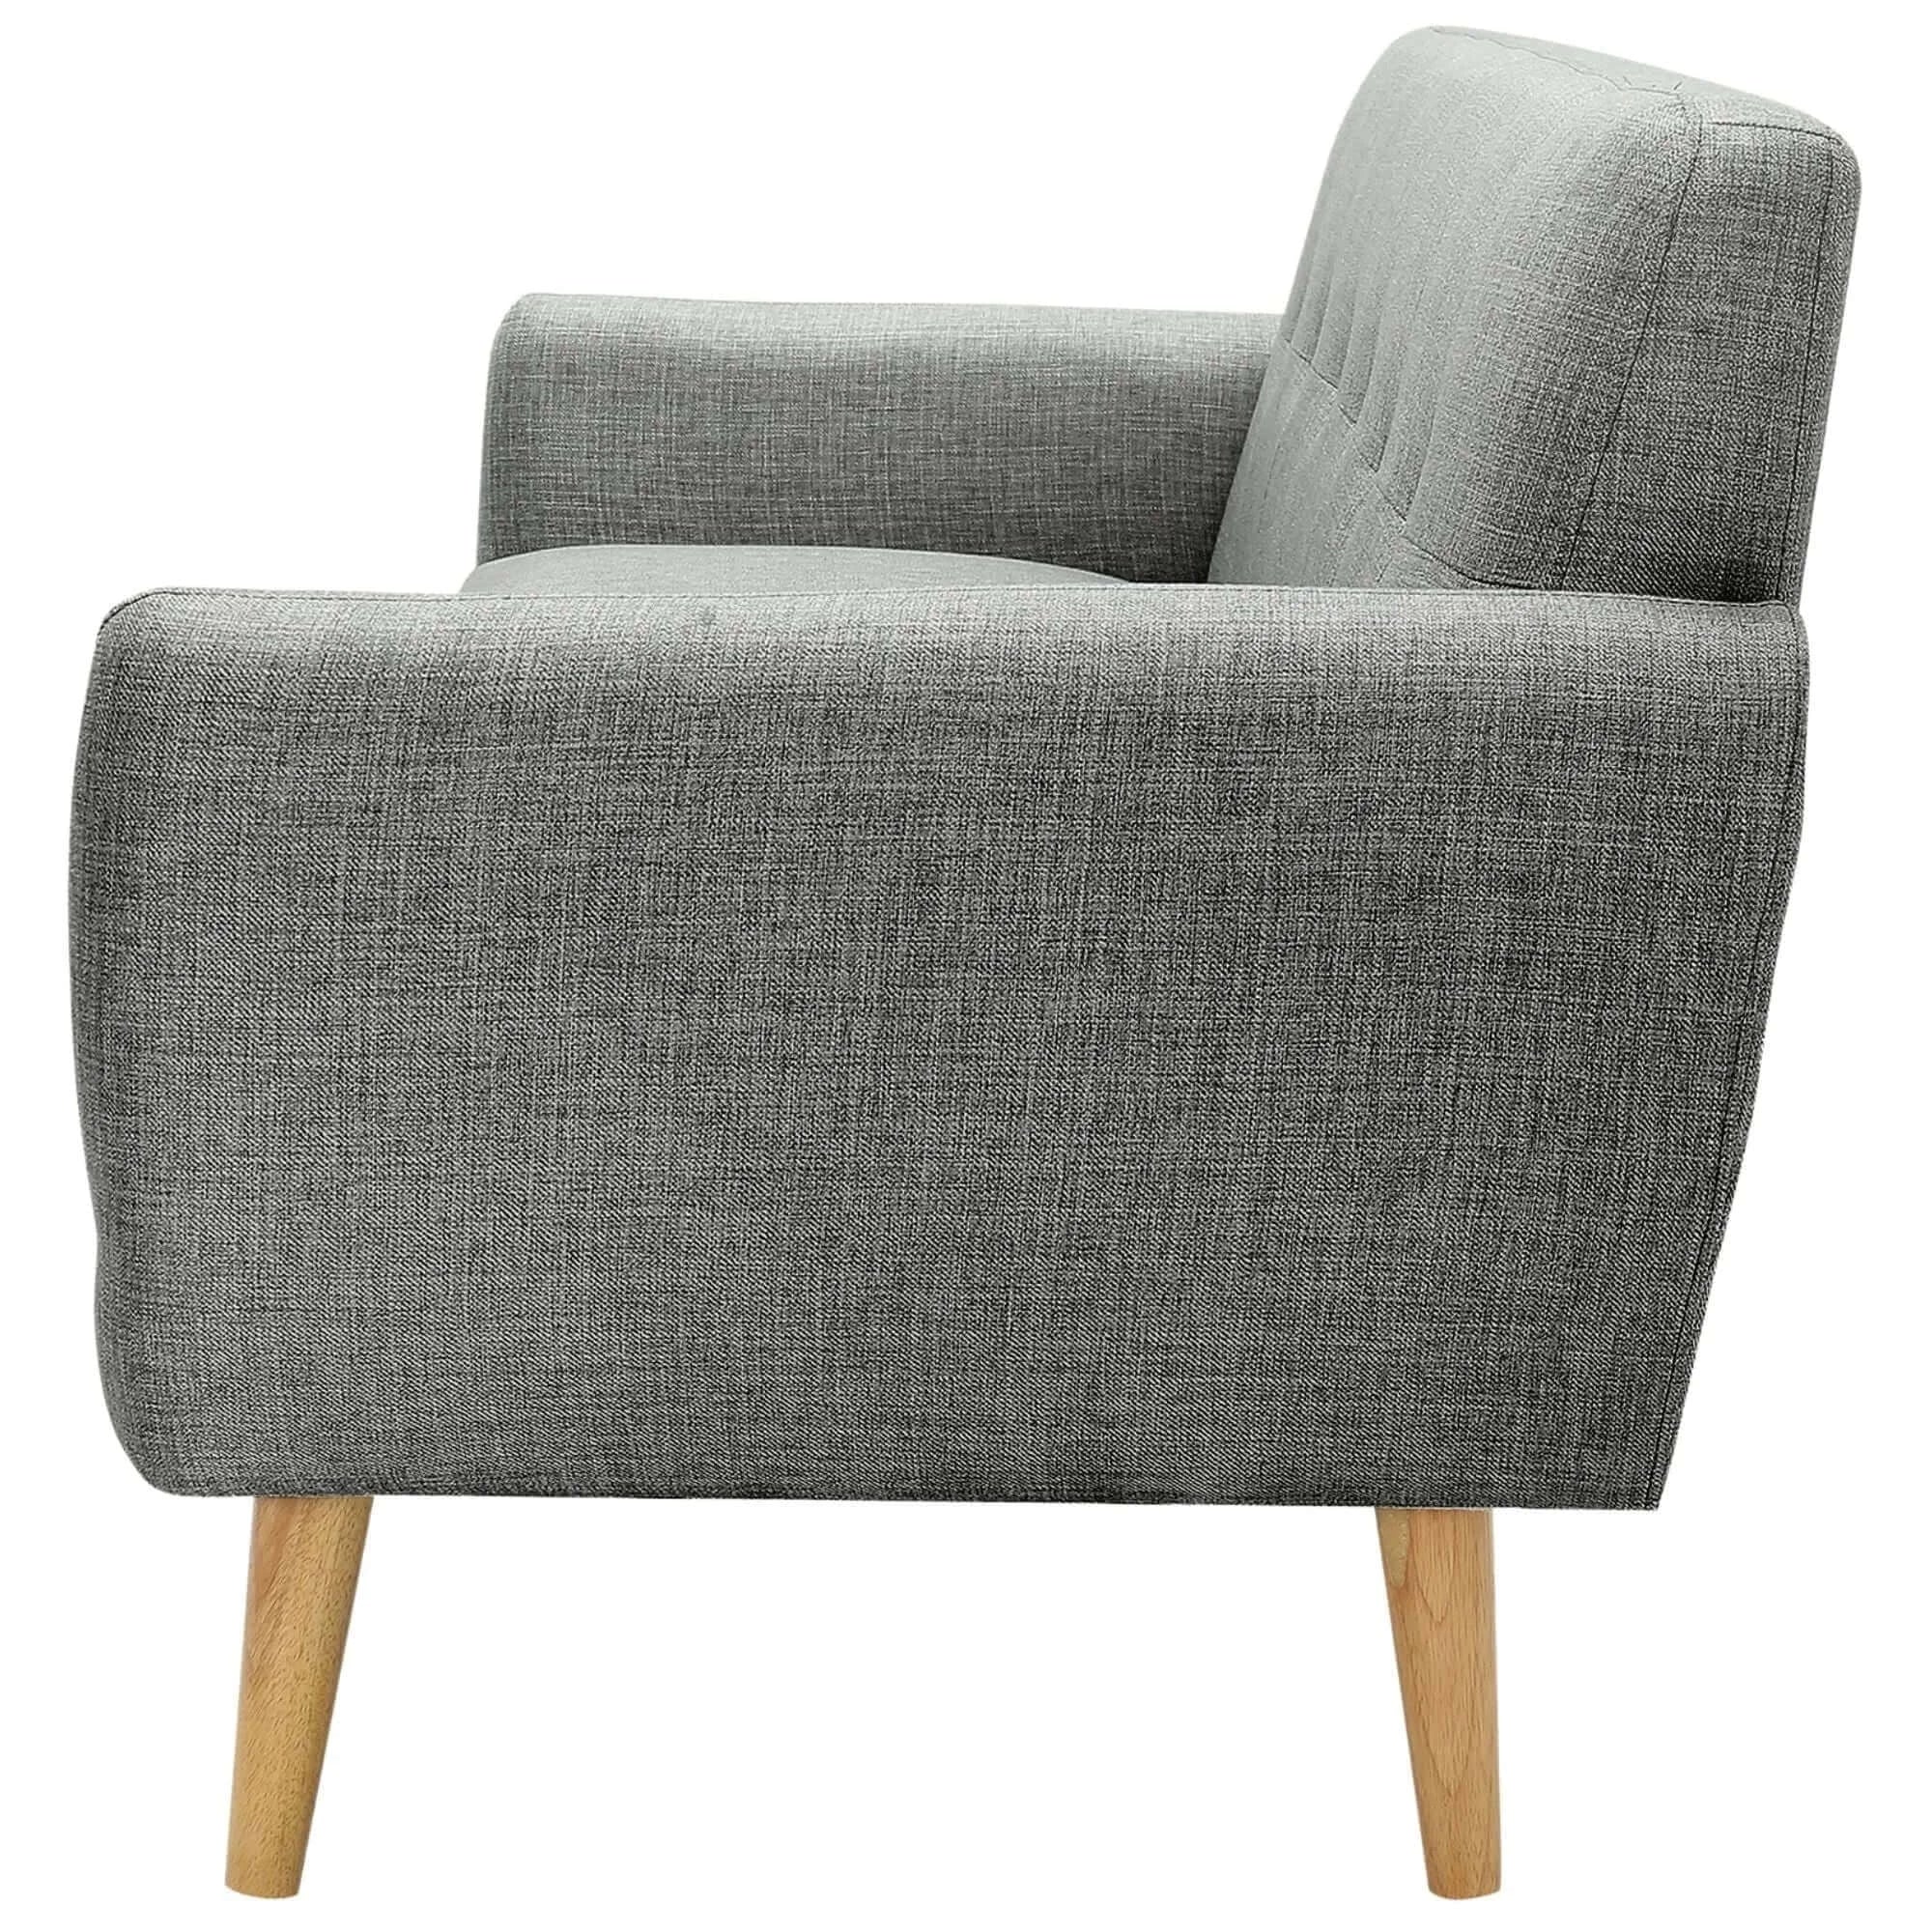 Buy dane 3 + 1 + 1 seater fabric upholstered sofa armchair lounge couch - mid grey - upinteriors-Upinteriors